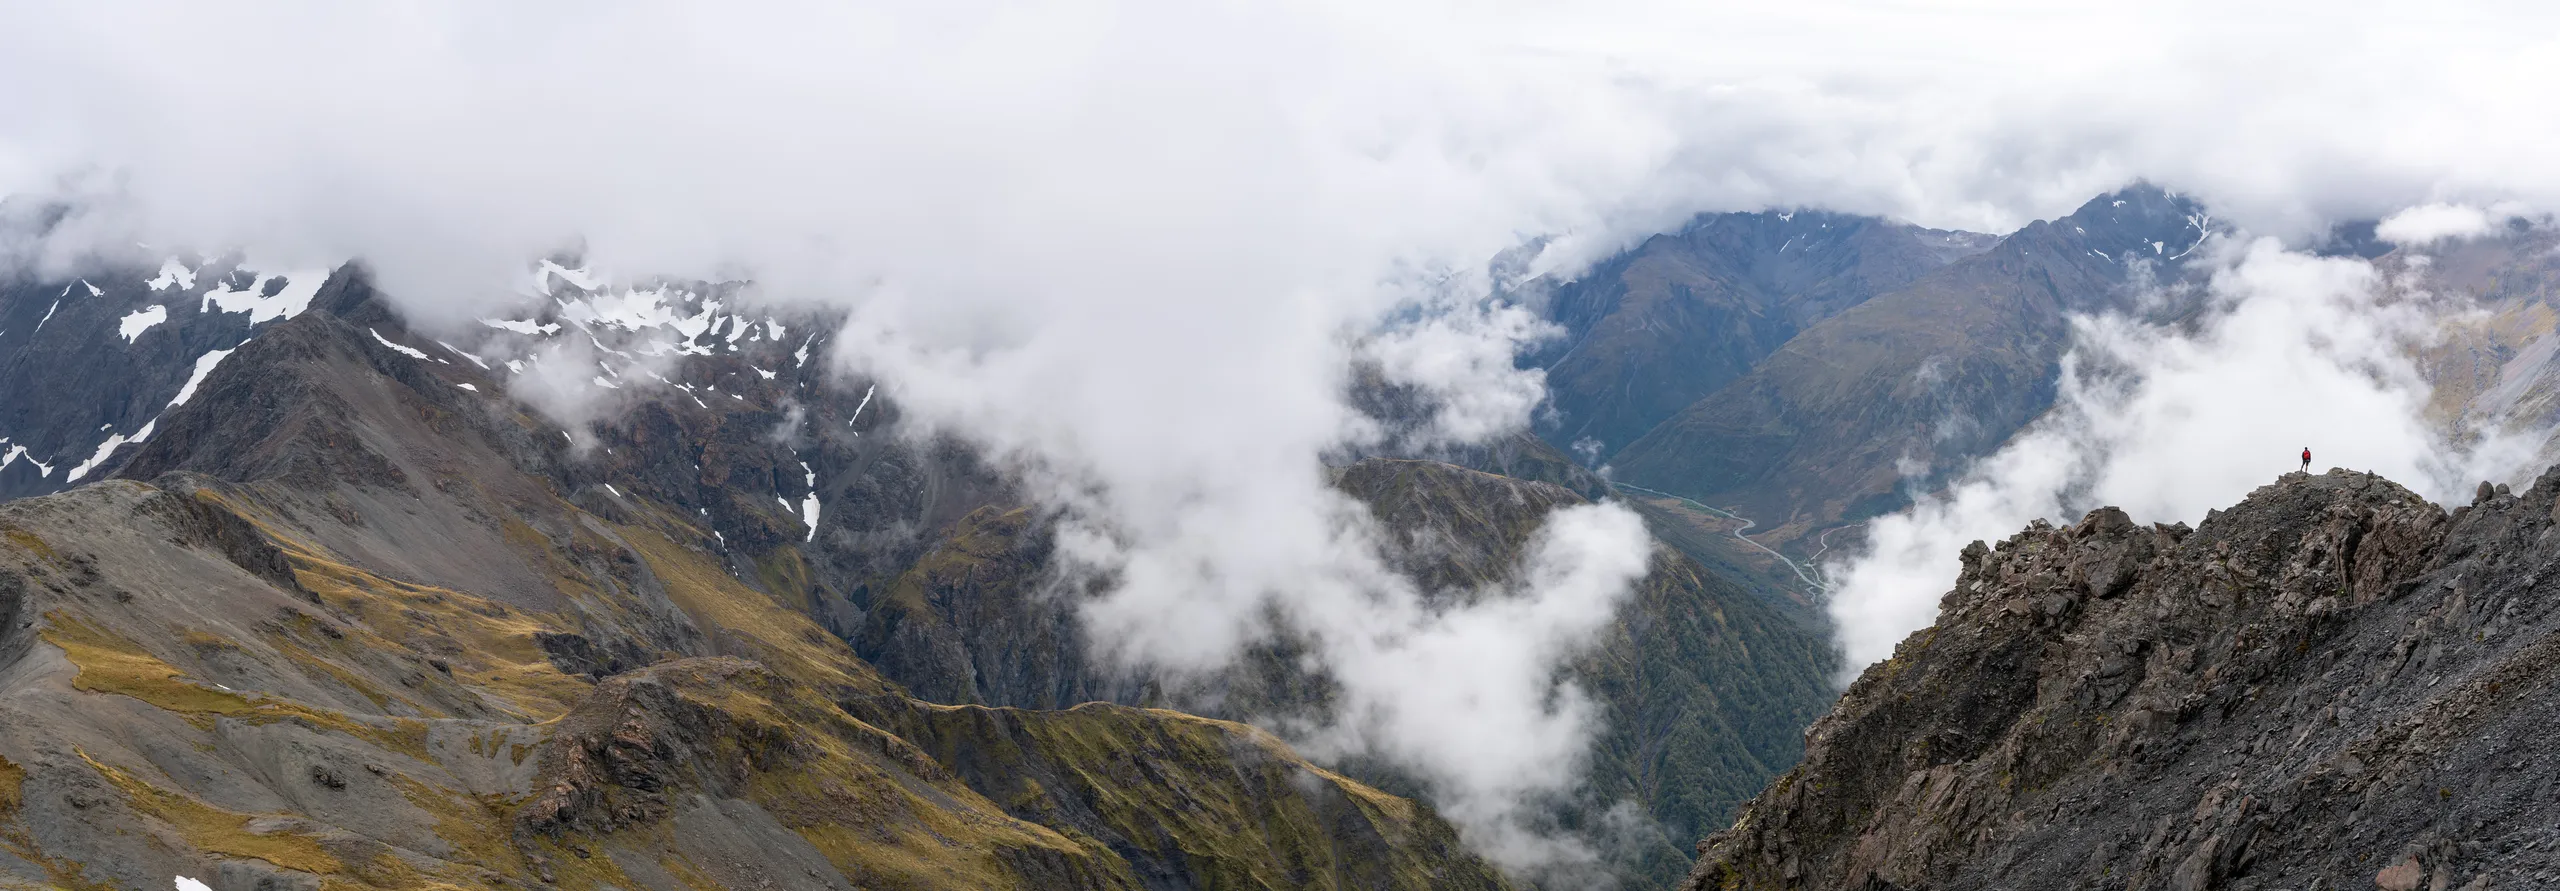 Dramatic vista from the summit. A hiker can be seen admiring the view. Far below, the highway winds up towards Arthur's Pass proper.